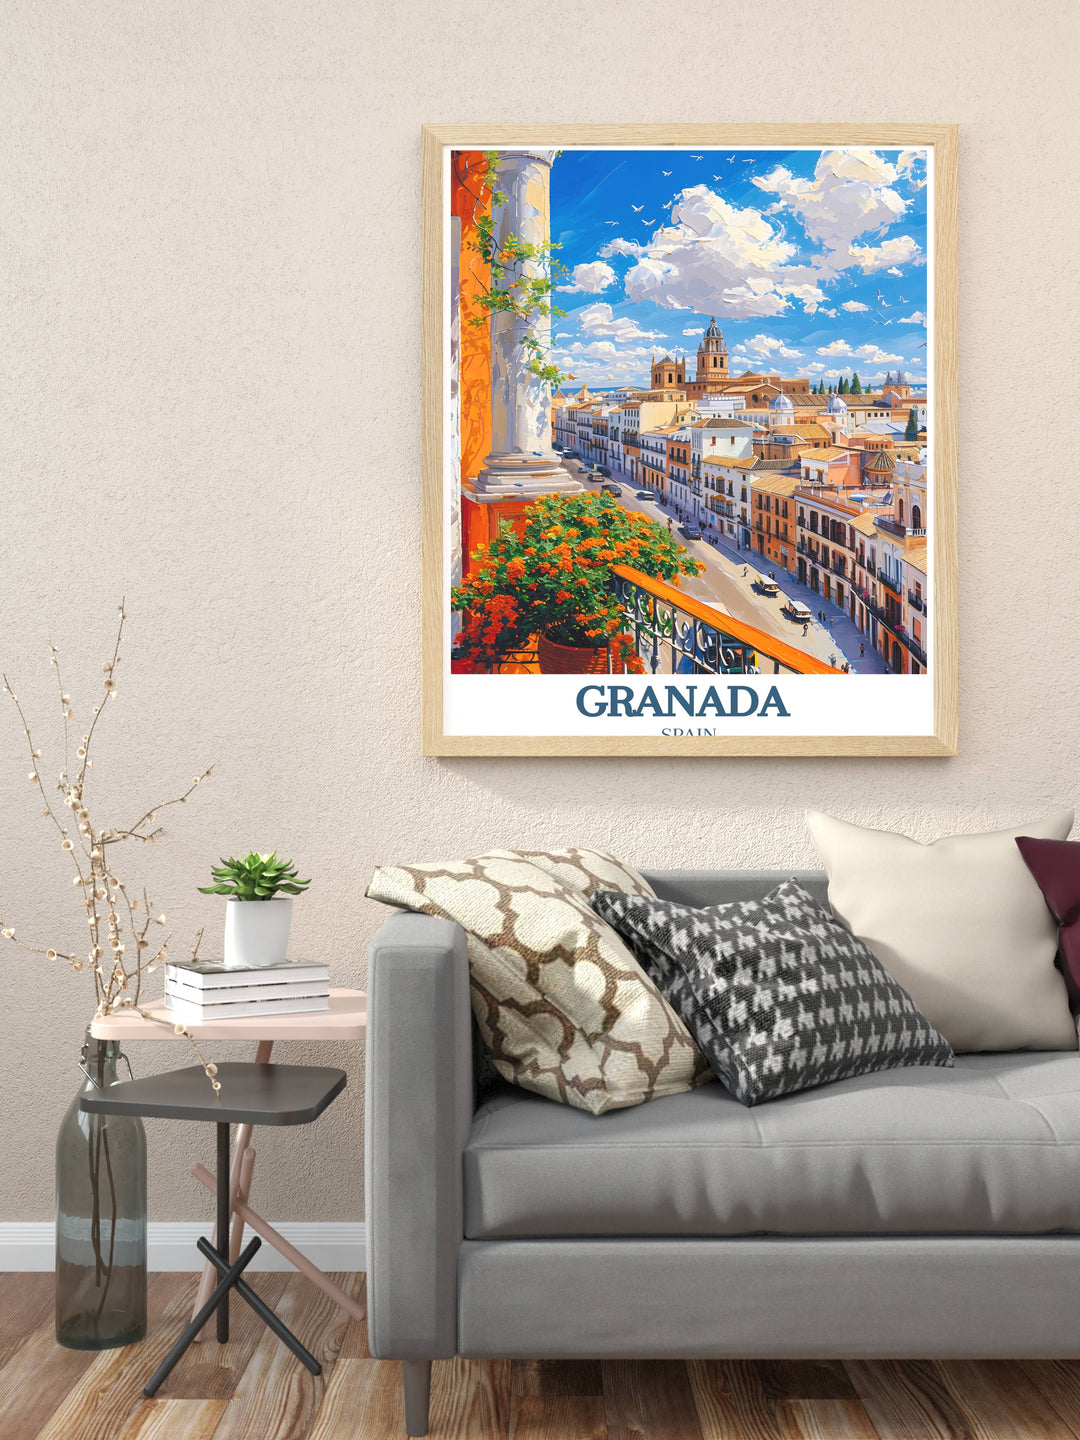 Add a touch of Spanish elegance to your home with our vibrant Granada Spain Art, ideal for lovers of Spanish culture.